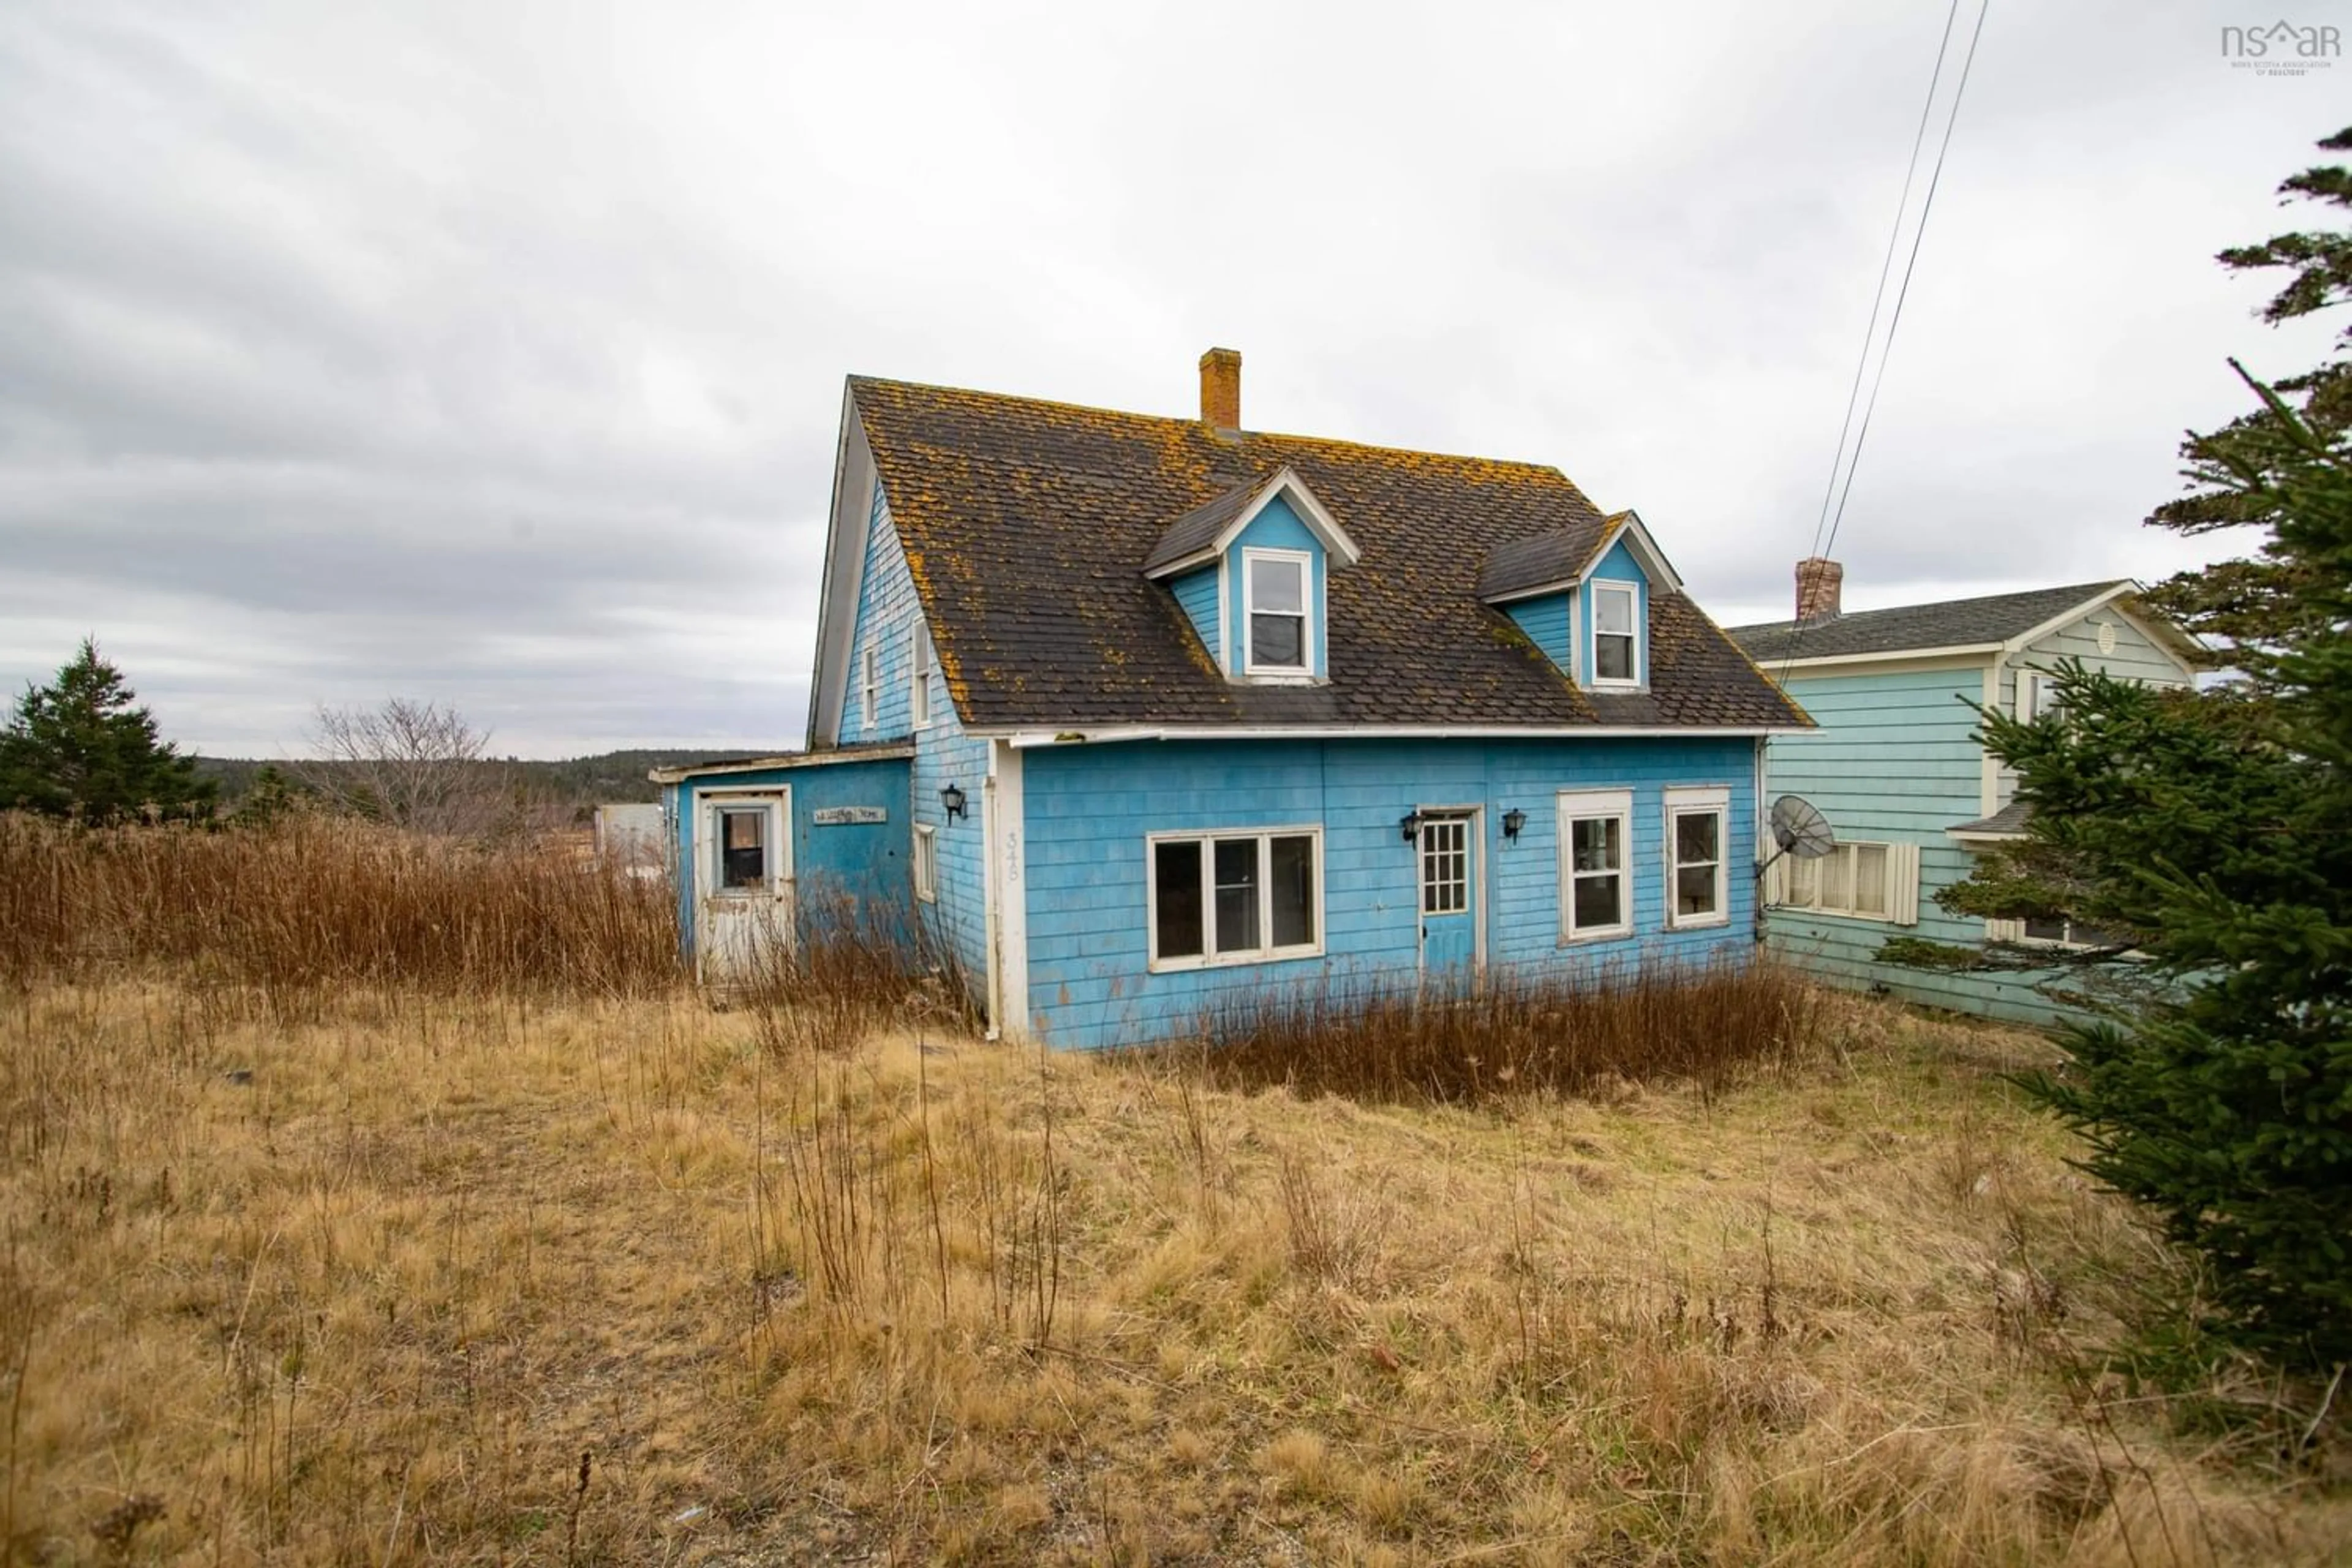 Home with unknown exterior material for 348 217 Hwy, Freeport Nova Scotia B0V 1B0